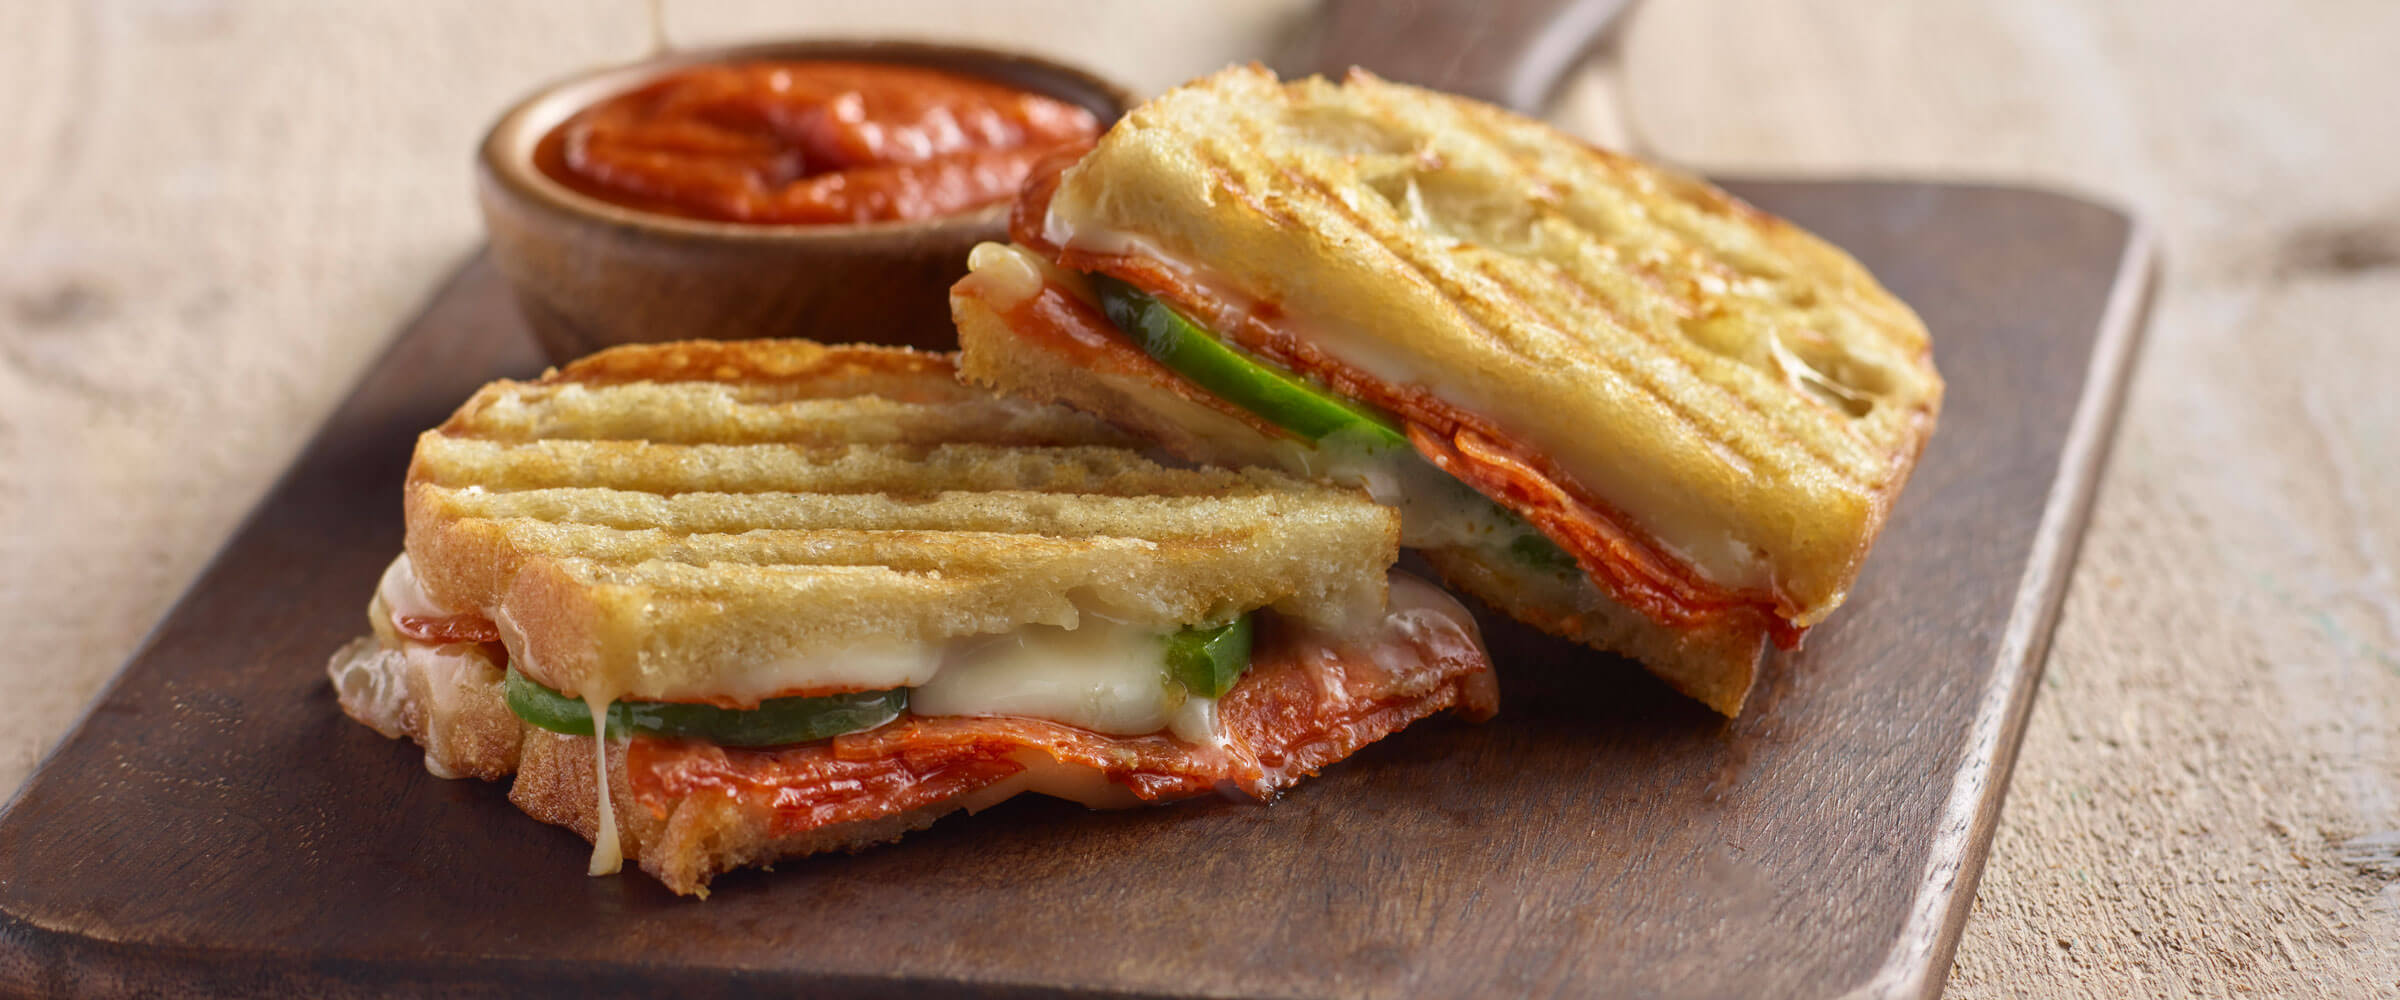 Pepperoni and Mozzarella Panini on wood board with bowl of dipping sauce